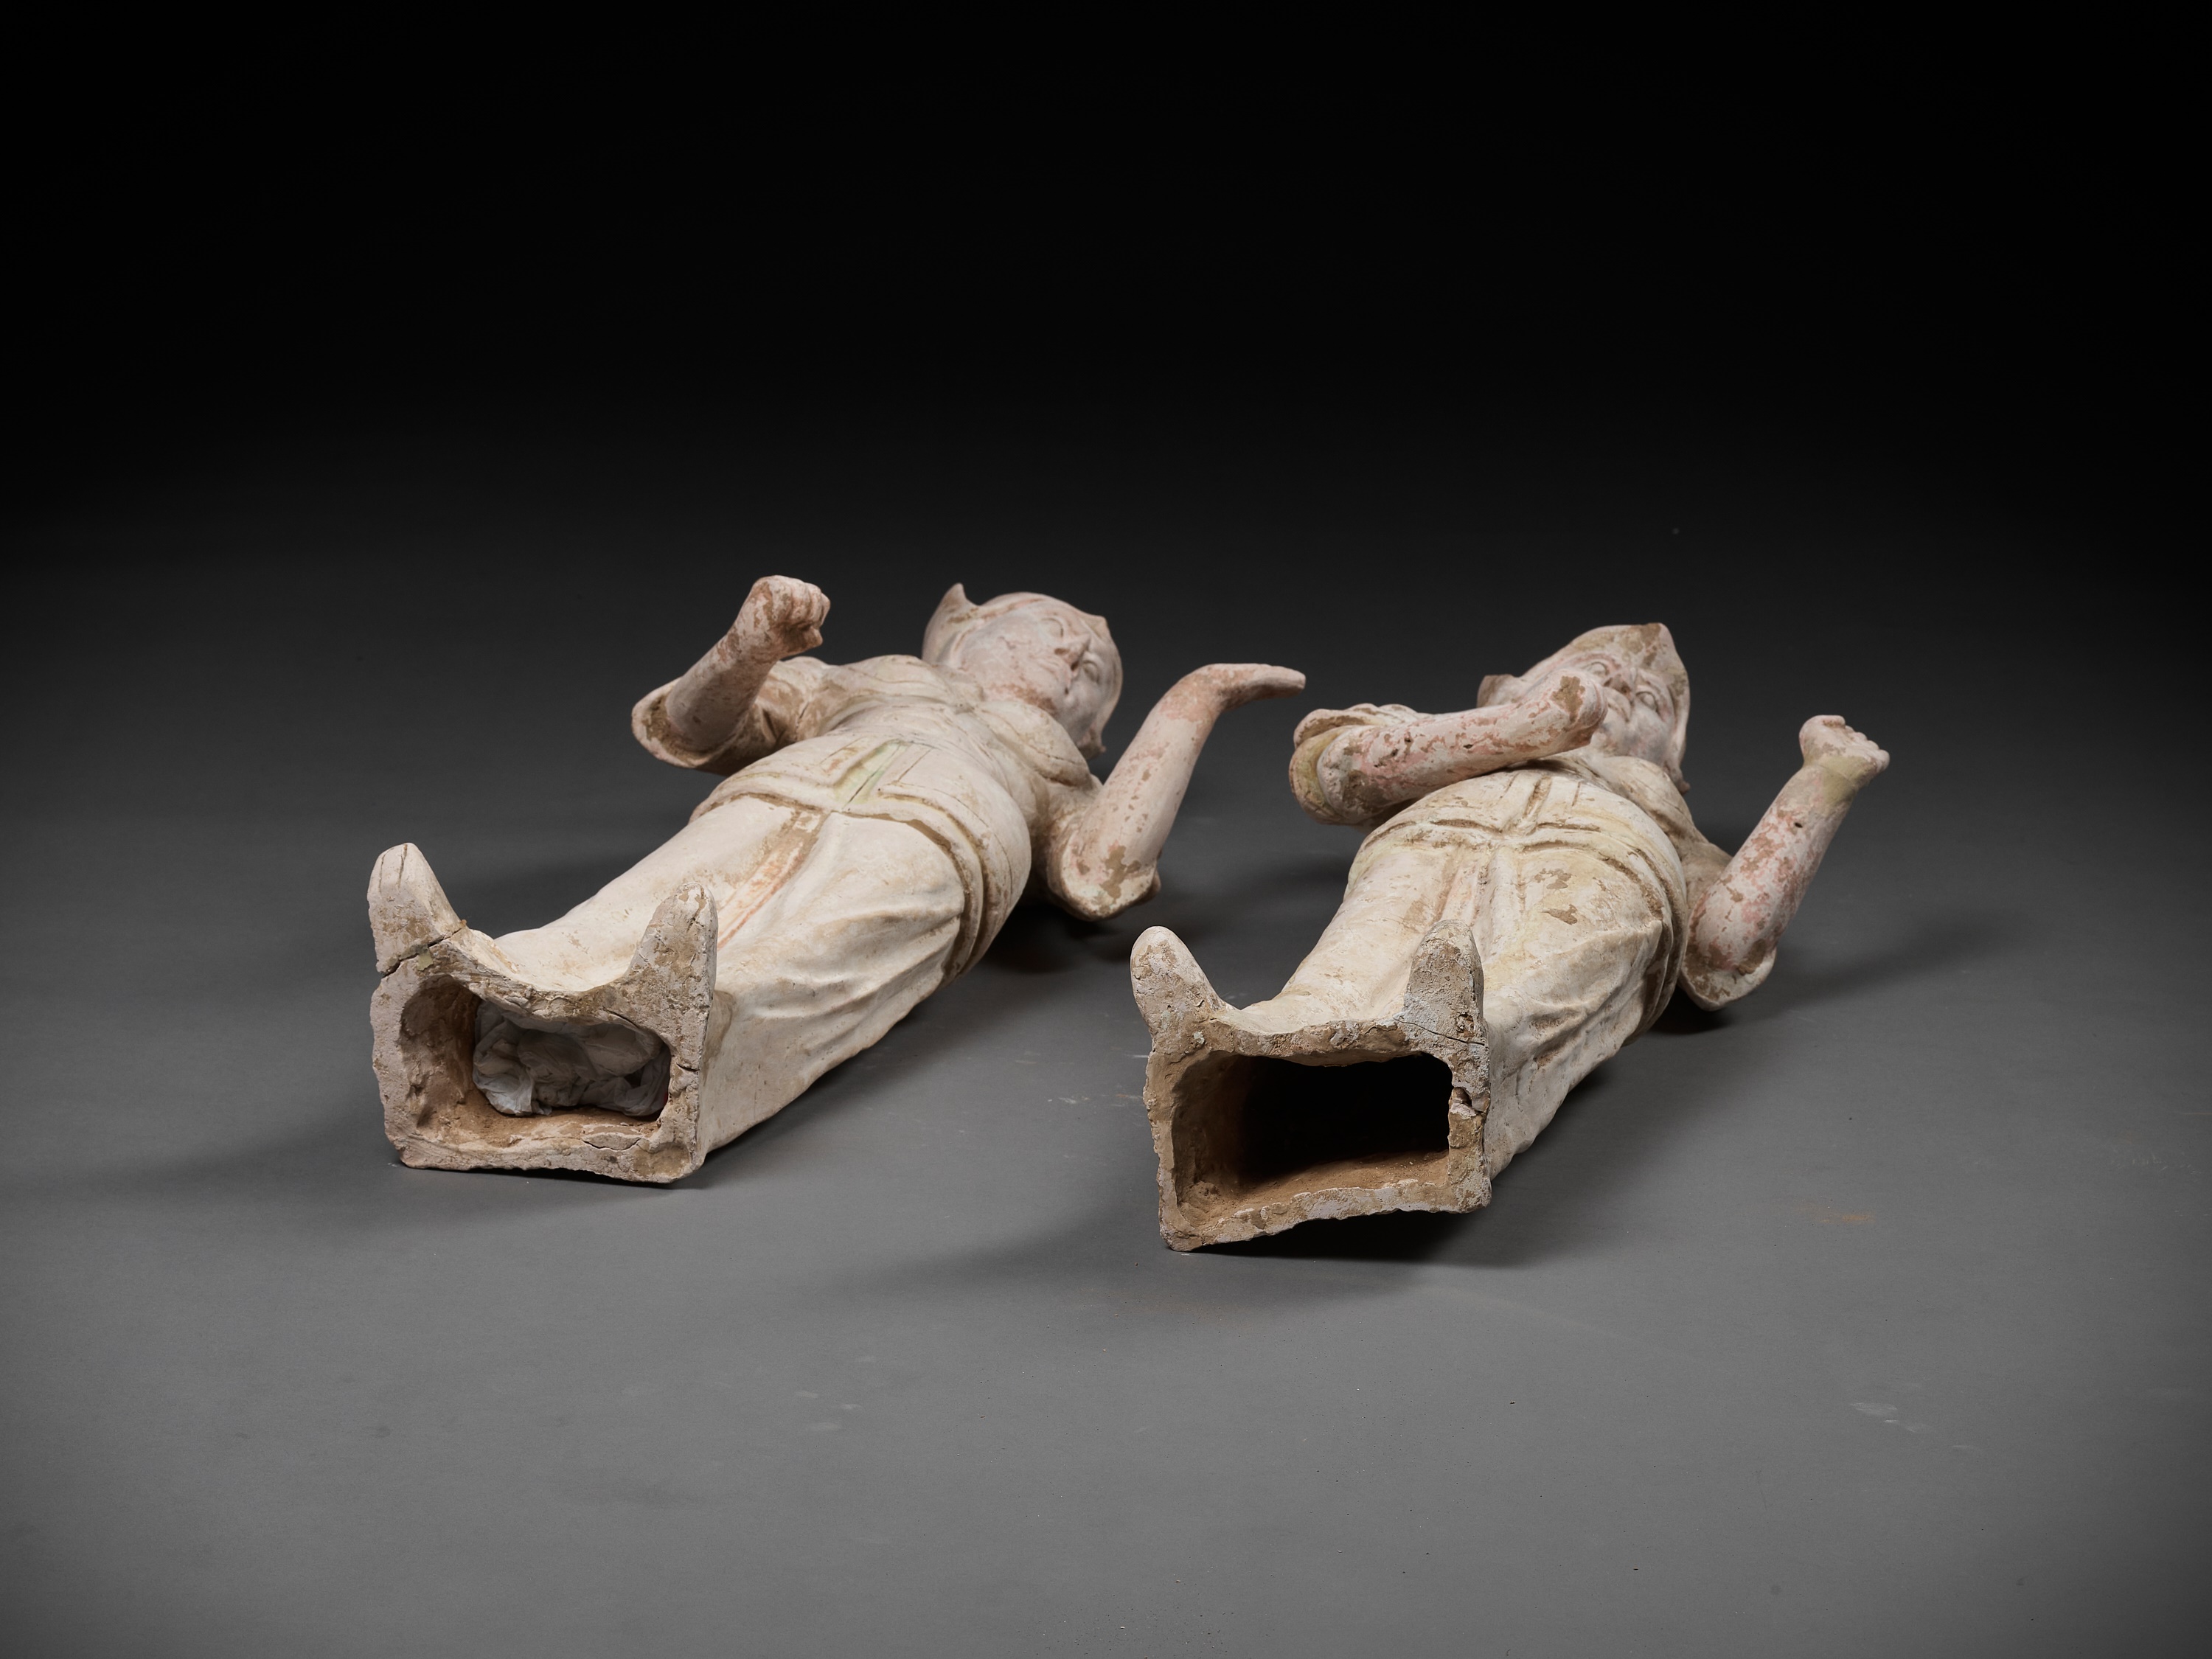 A PAIR OF LARGE POTTERY GUARDIAN FIGURES, WUSHIYONG, TANG DYNASTY - Image 12 of 12